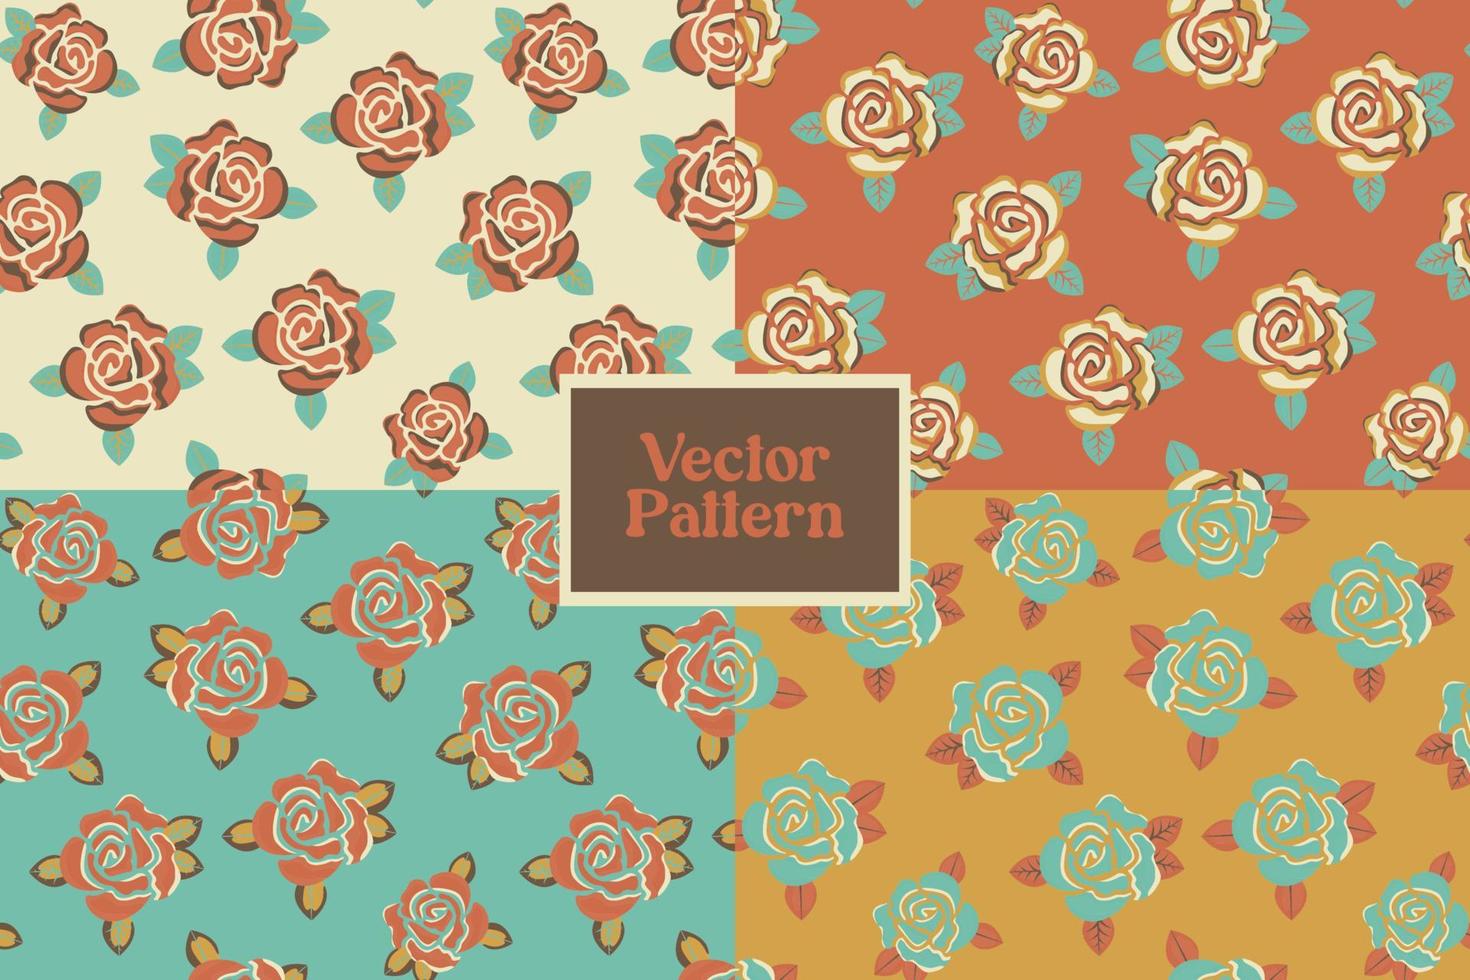 Set of vintage abstract floral rose flower seamless repeat vector pattern